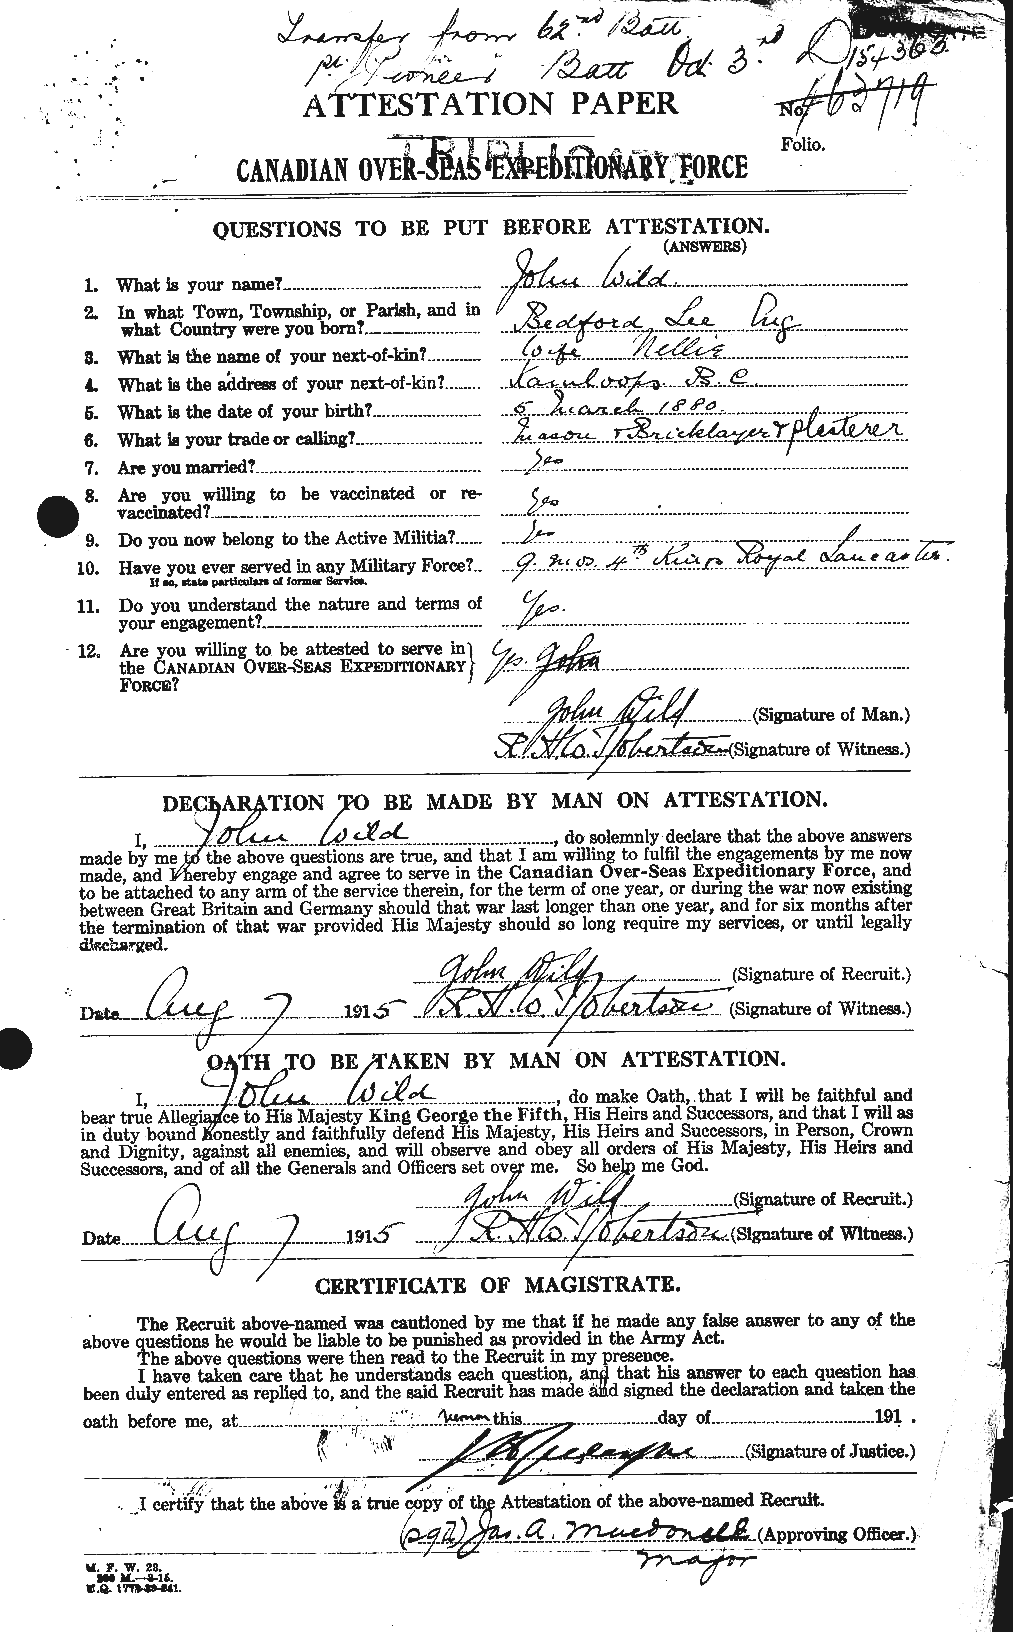 Personnel Records of the First World War - CEF 672143a